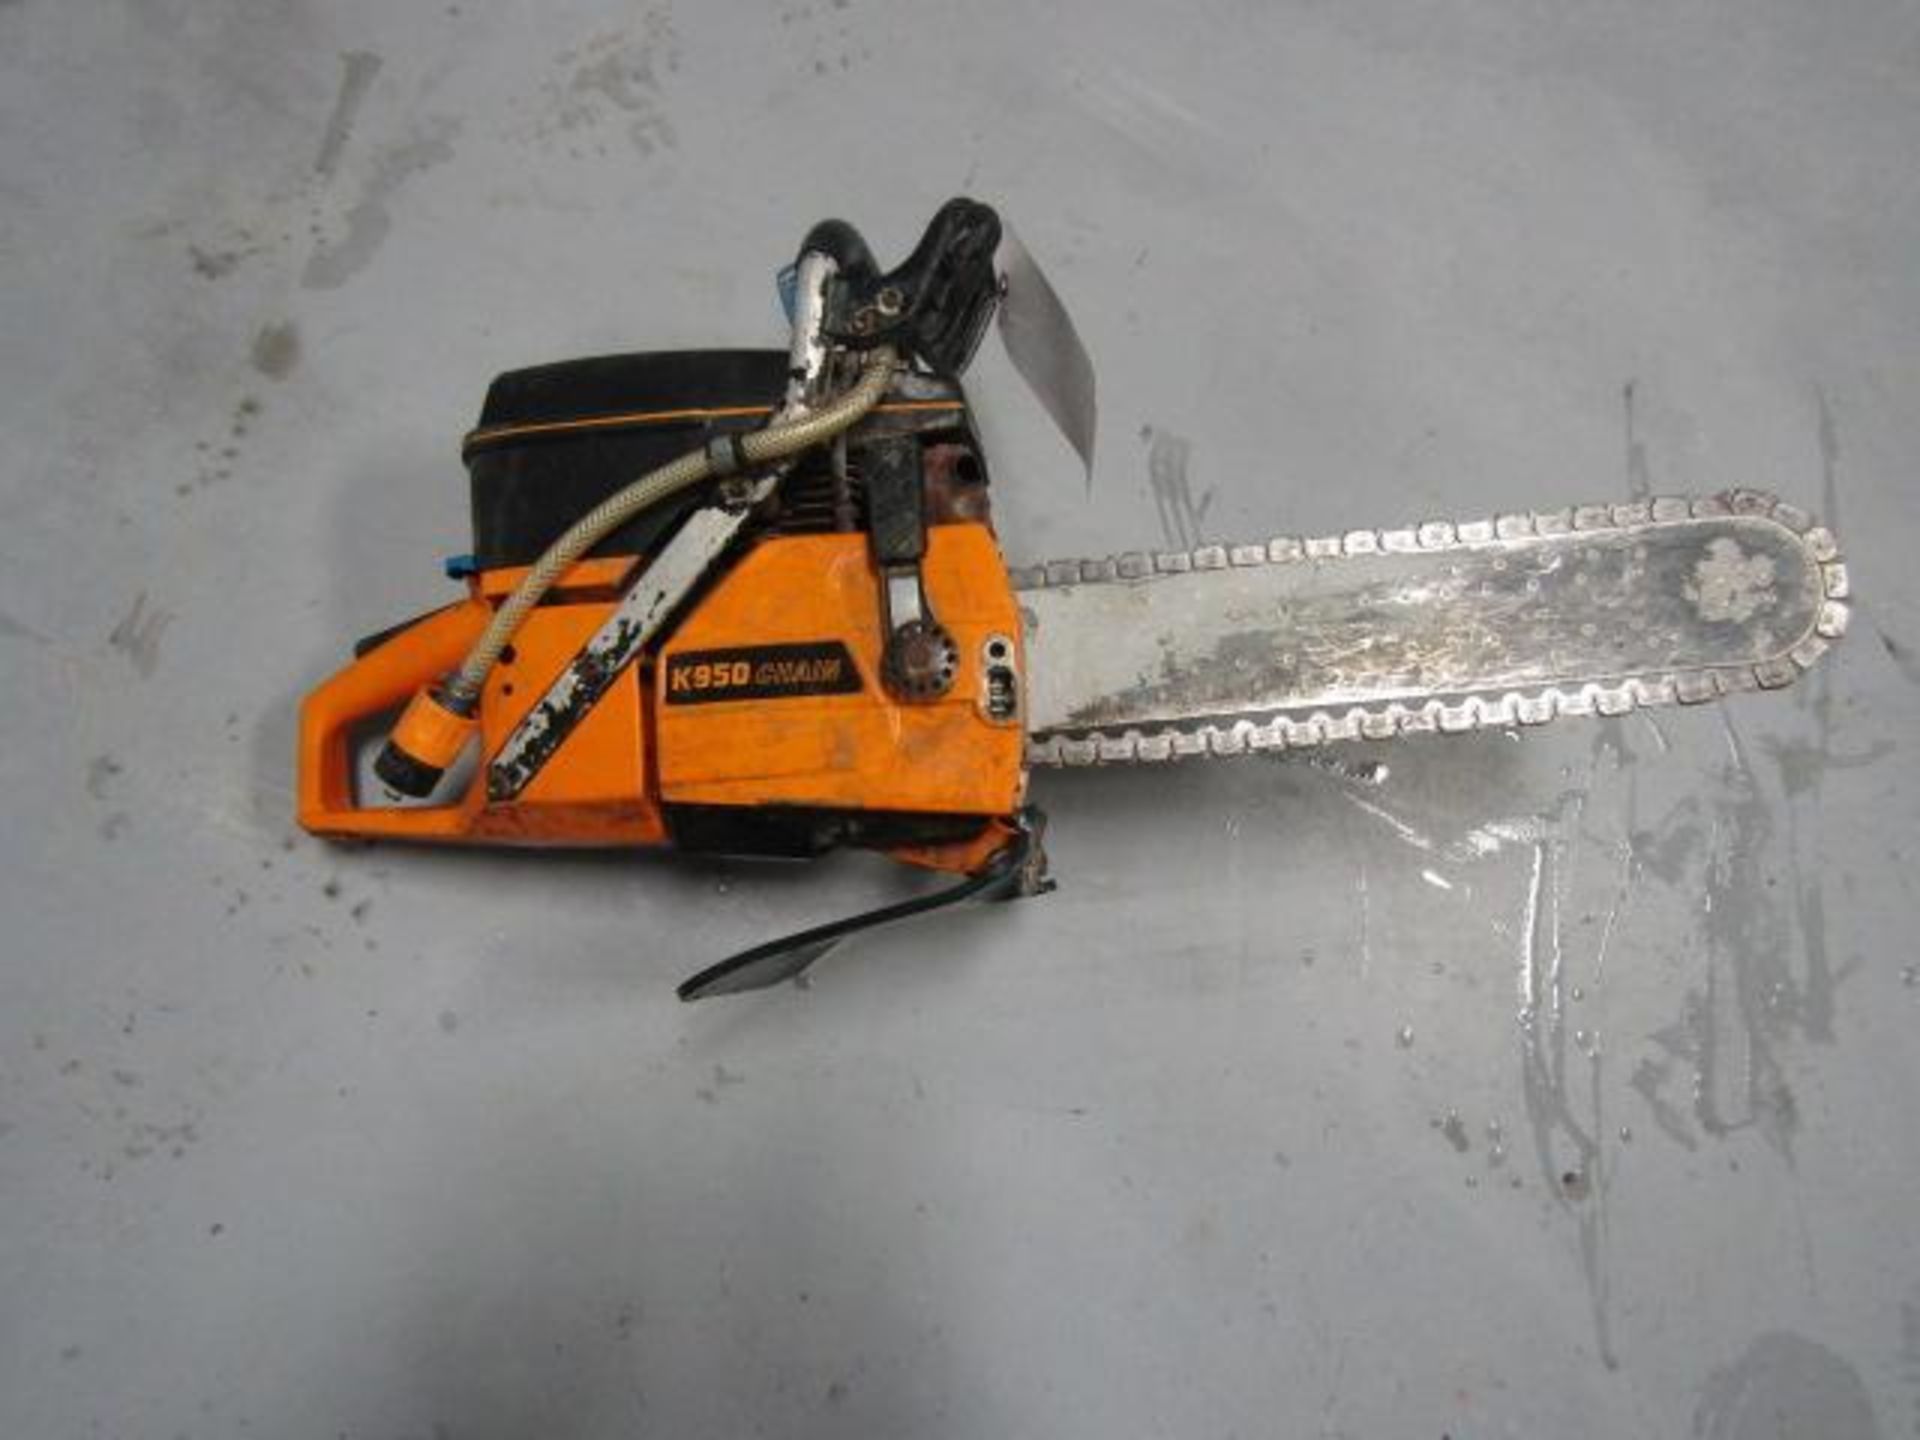 Partner K950 Chain Saw - Image 6 of 6